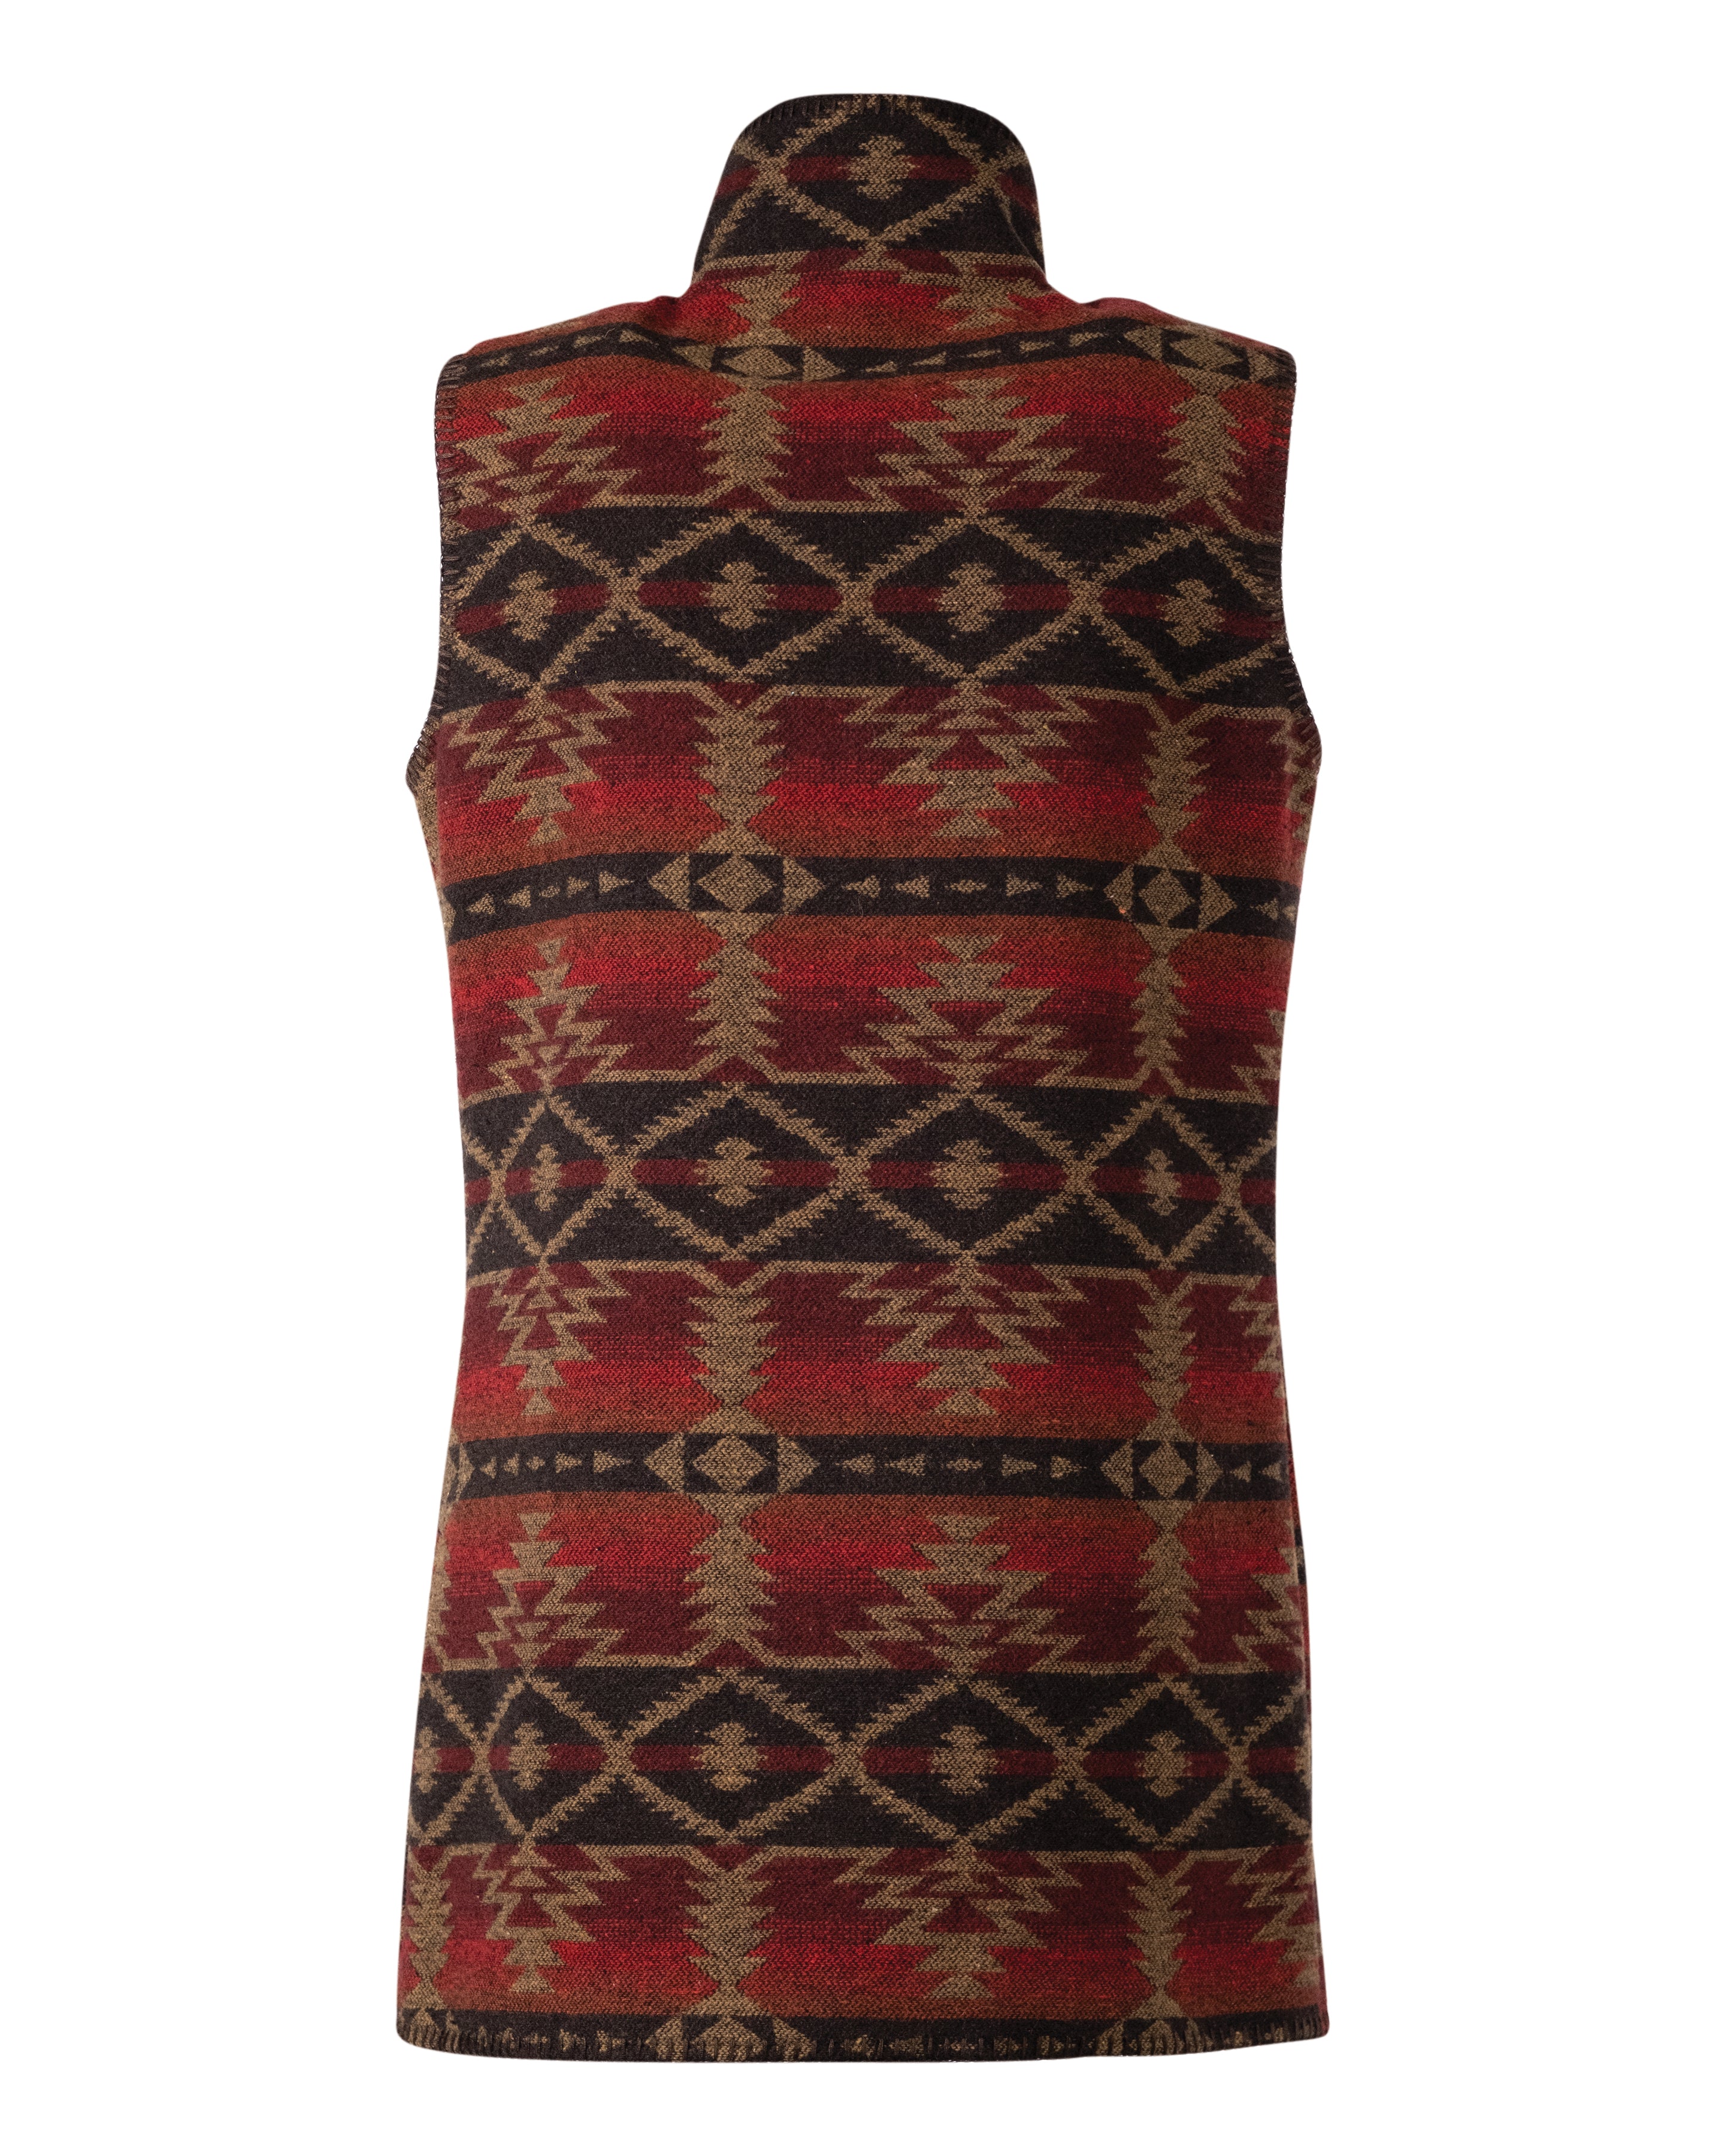 Outback Traders Stockard Vest